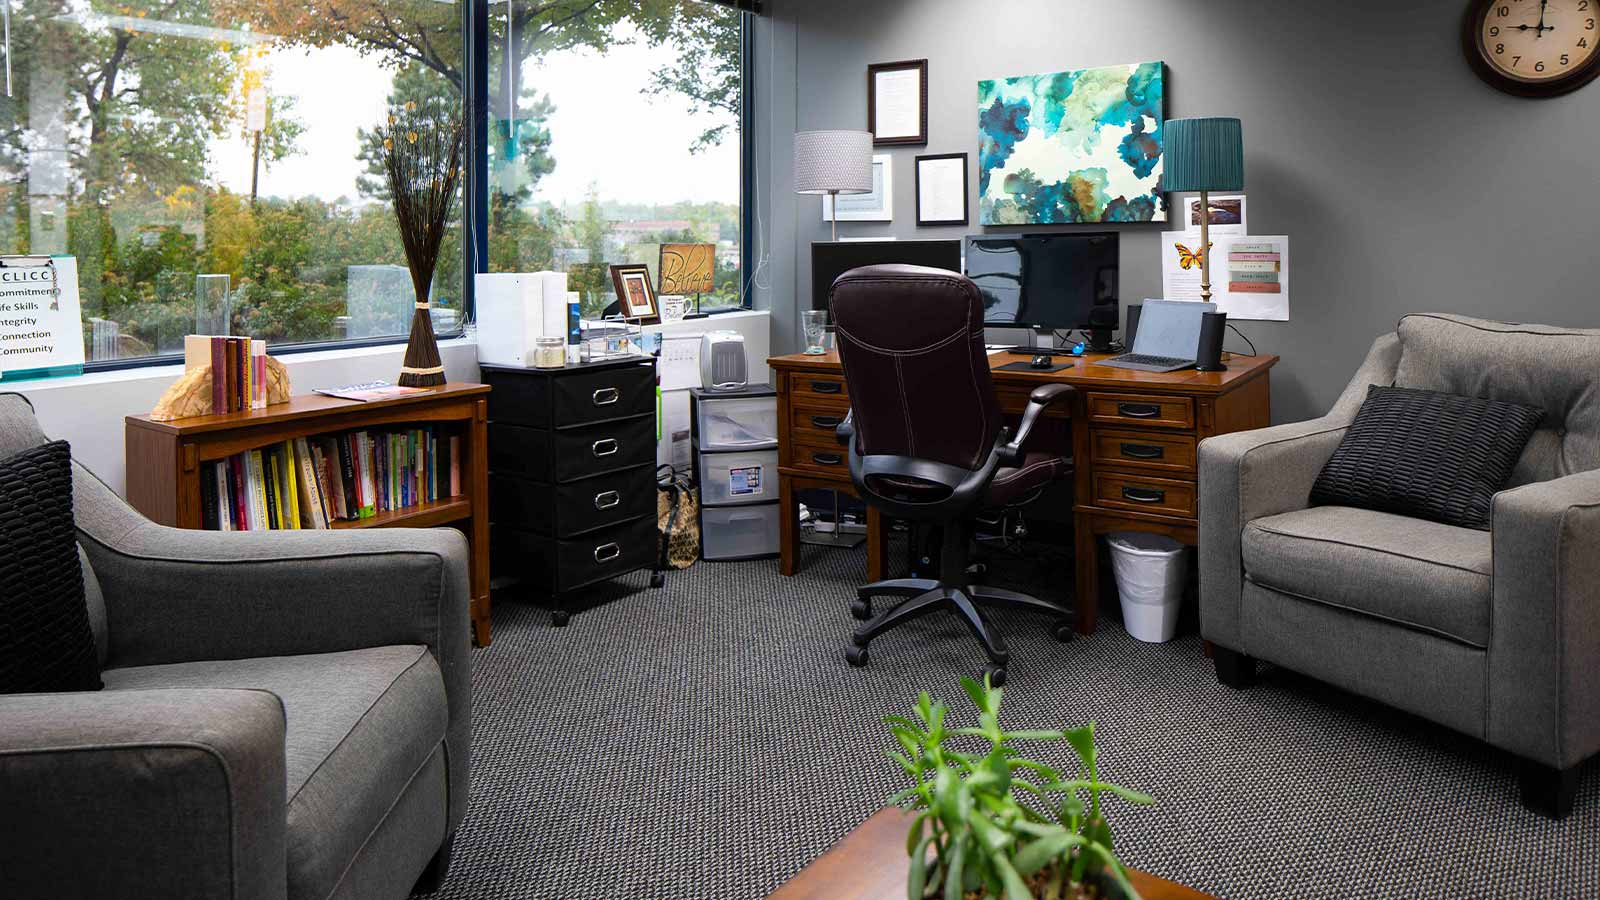 An inviting therapist's office with comfortable chairs, bookshelves, and a large window providing natural light.